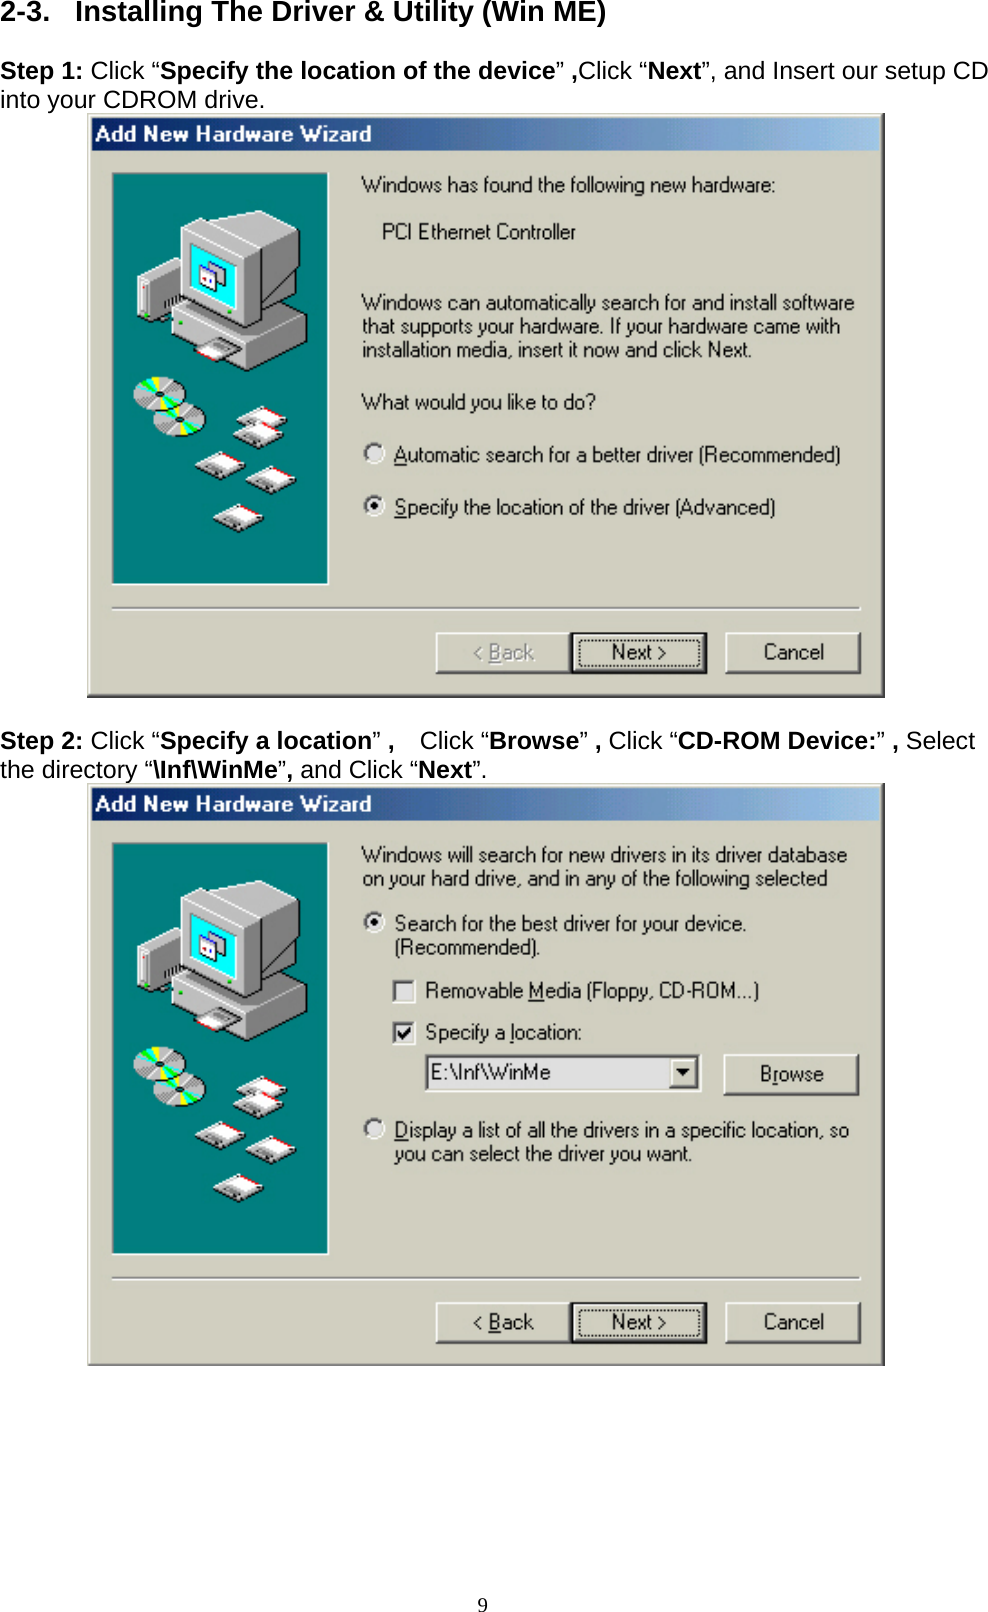 9  2-3.  Installing The Driver &amp; Utility (Win ME)  Step 1: Click “Specify the location of the device” ,Click “Next”, and Insert our setup CD into your CDROM drive.           Step 2: Click “Specify a location” ,    Click “Browse” , Click “CD-ROM Device:” , Select the directory “\Inf\WinMe”, and Click “Next”.           